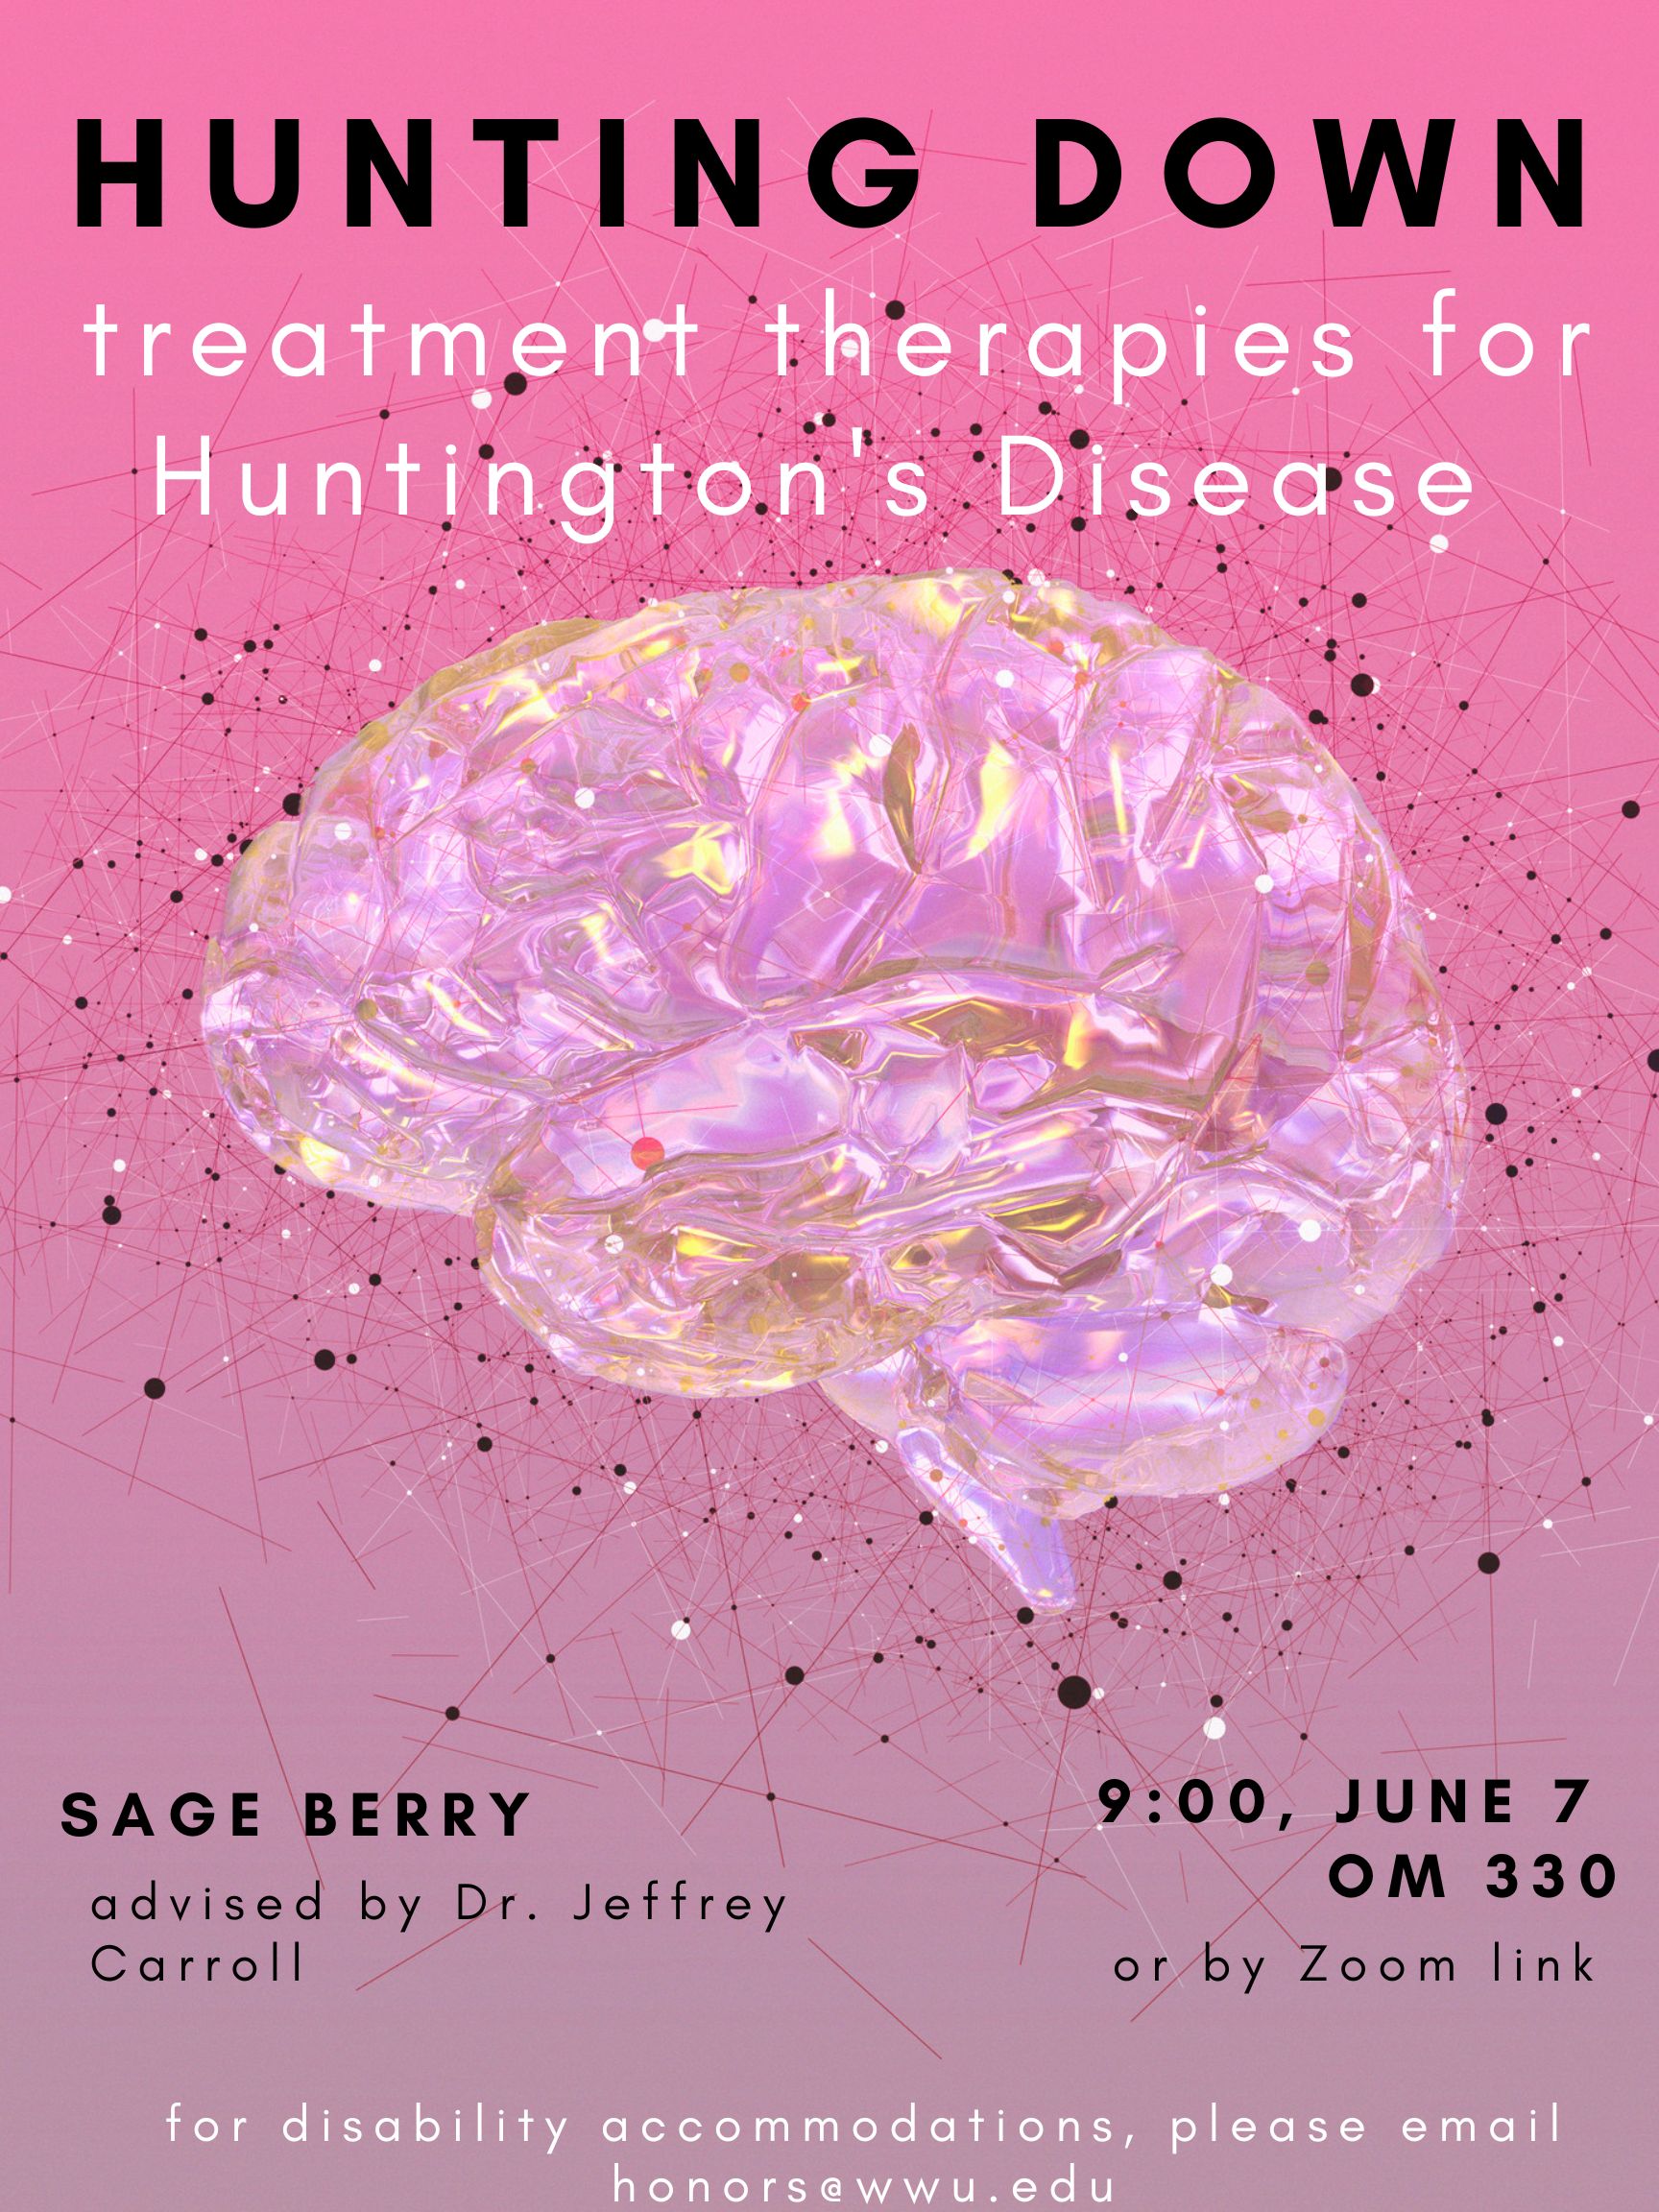 A pink poster with a pink shiny brain featured in the middle, surrounded by doodles meant to represent neural networks. The title reads "Hunting Down Treatment Therapies for Huntington's Disease. Sage Berry, advised by Dr. Jeffrey Carroll. 9:00, June 7 OM330 or by Zoom link. For disability accommodations, please email honors@wwu.edu."